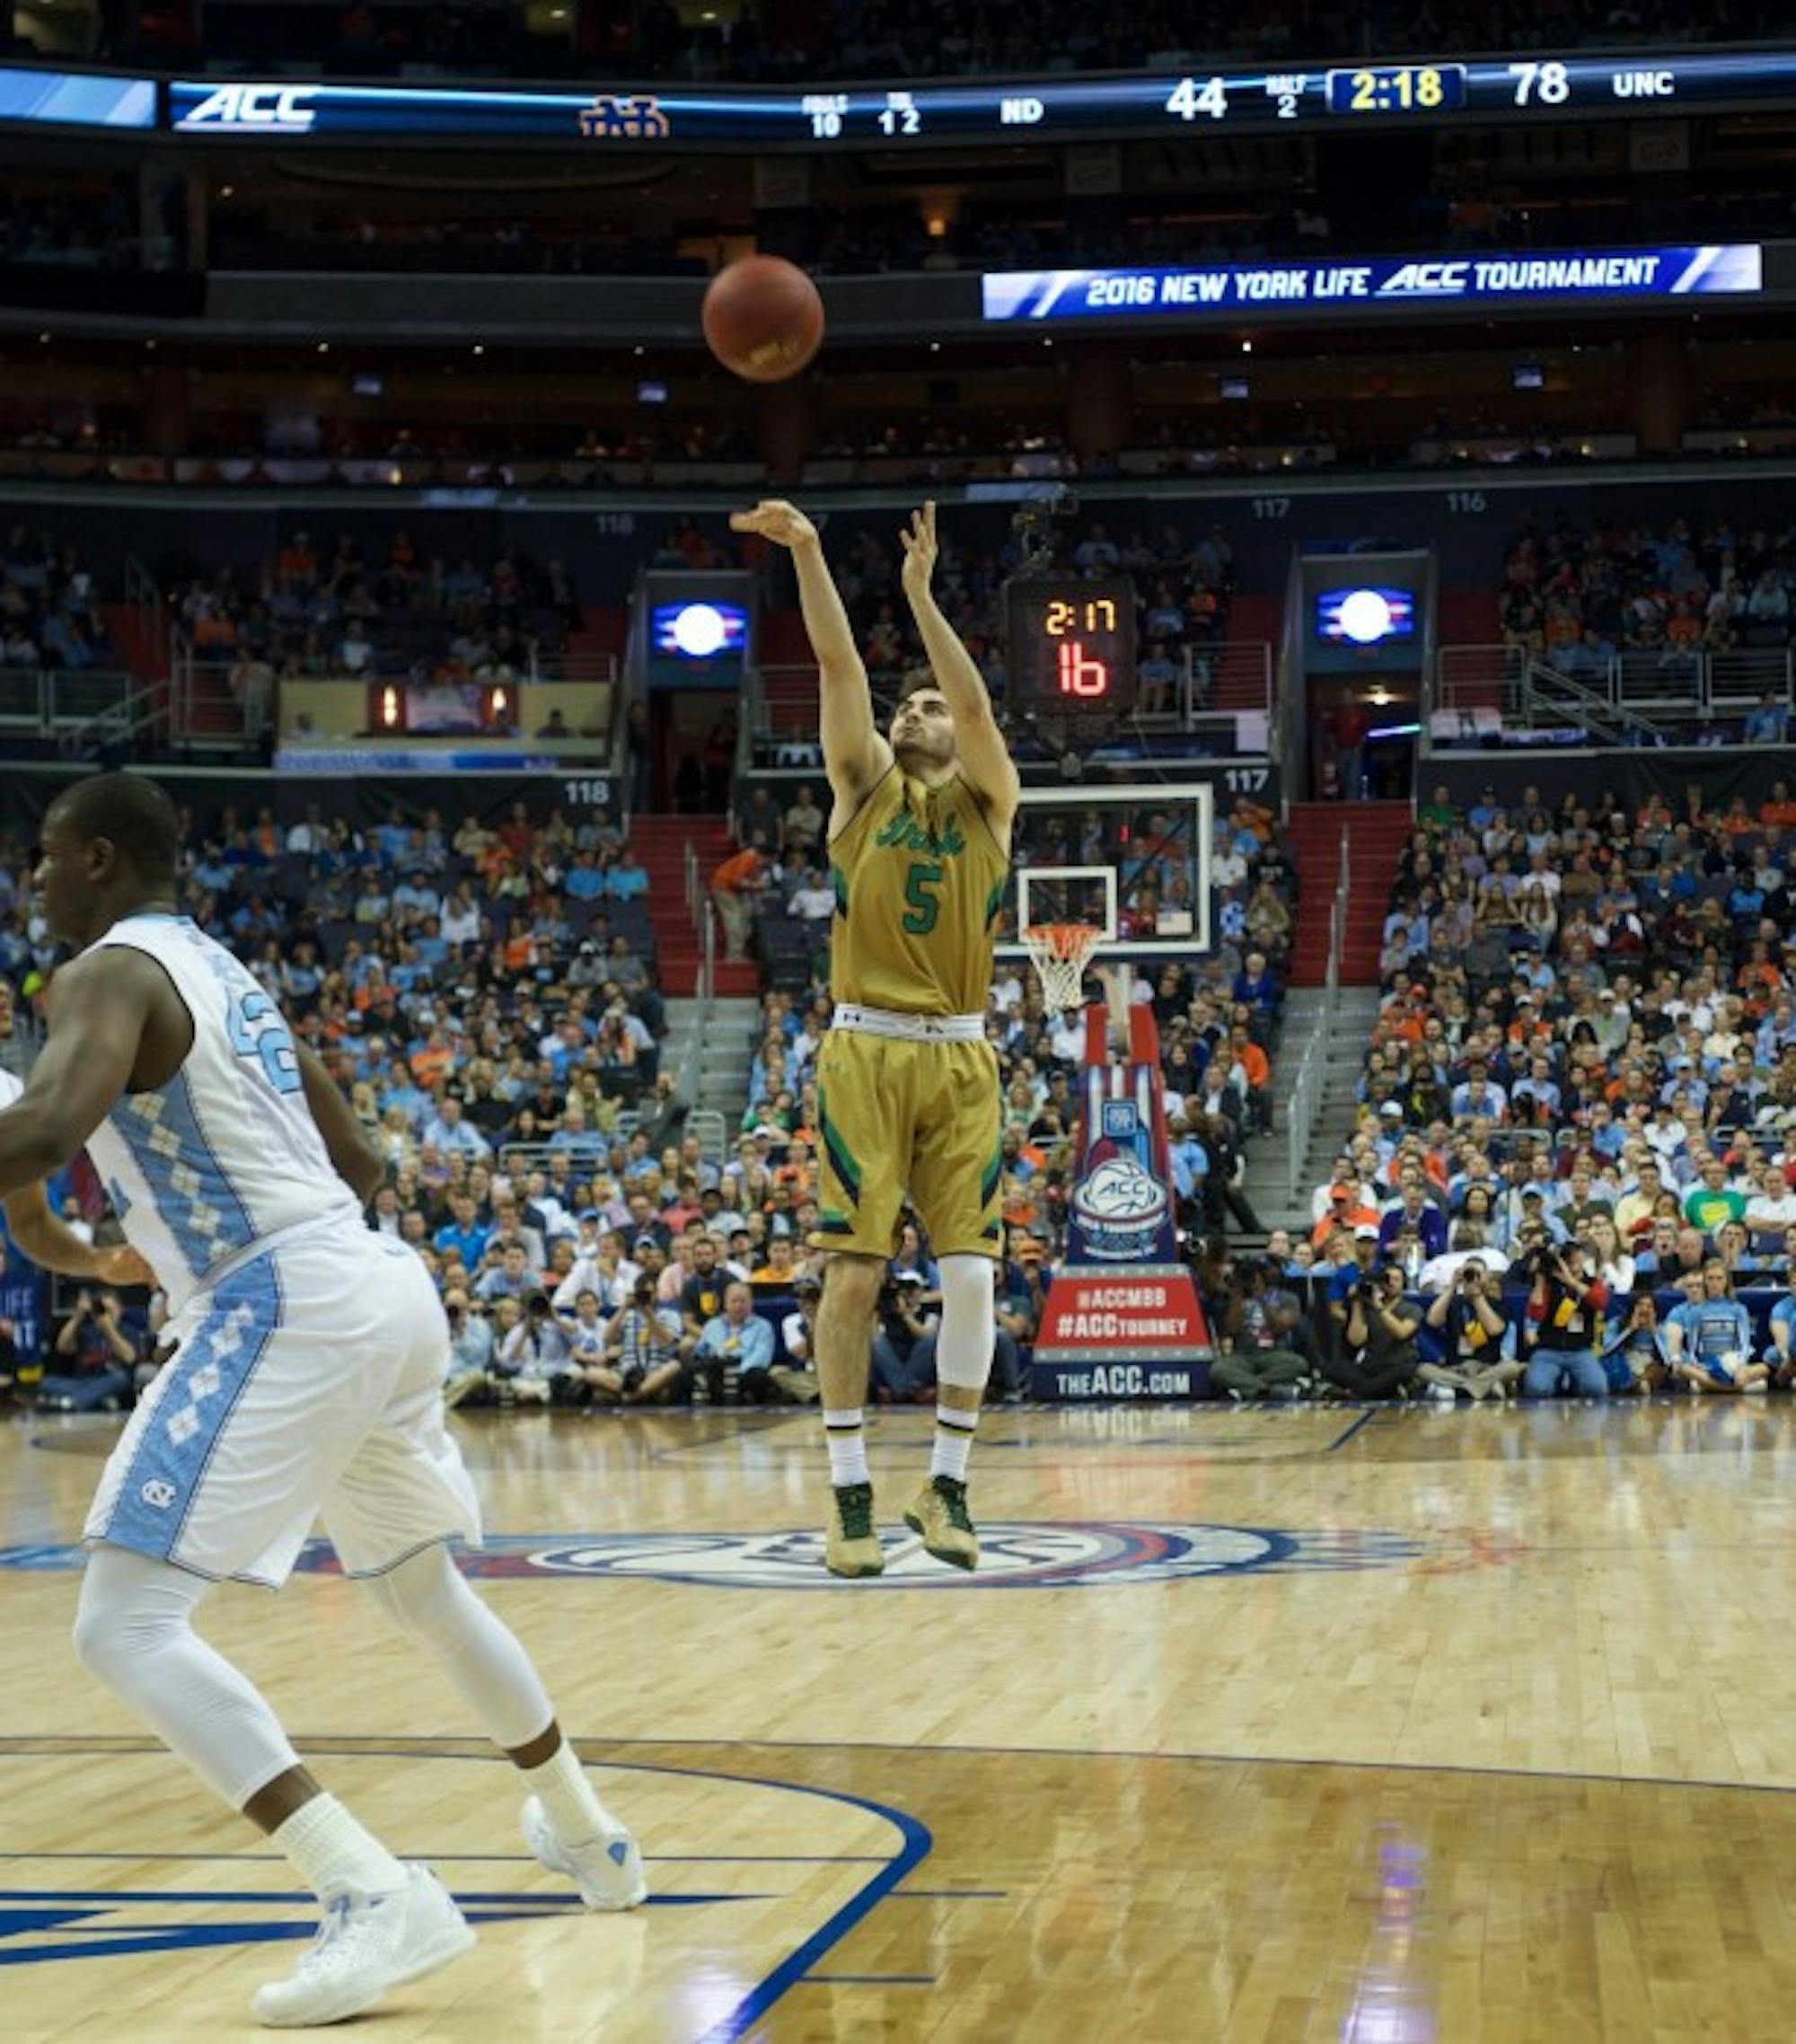 Sophomore guard Matt Farrell, who has started every game this NCAA tournament, takes a 3-pointer during Notre Dame’s 78-47 loss against North Carolina on March 11.